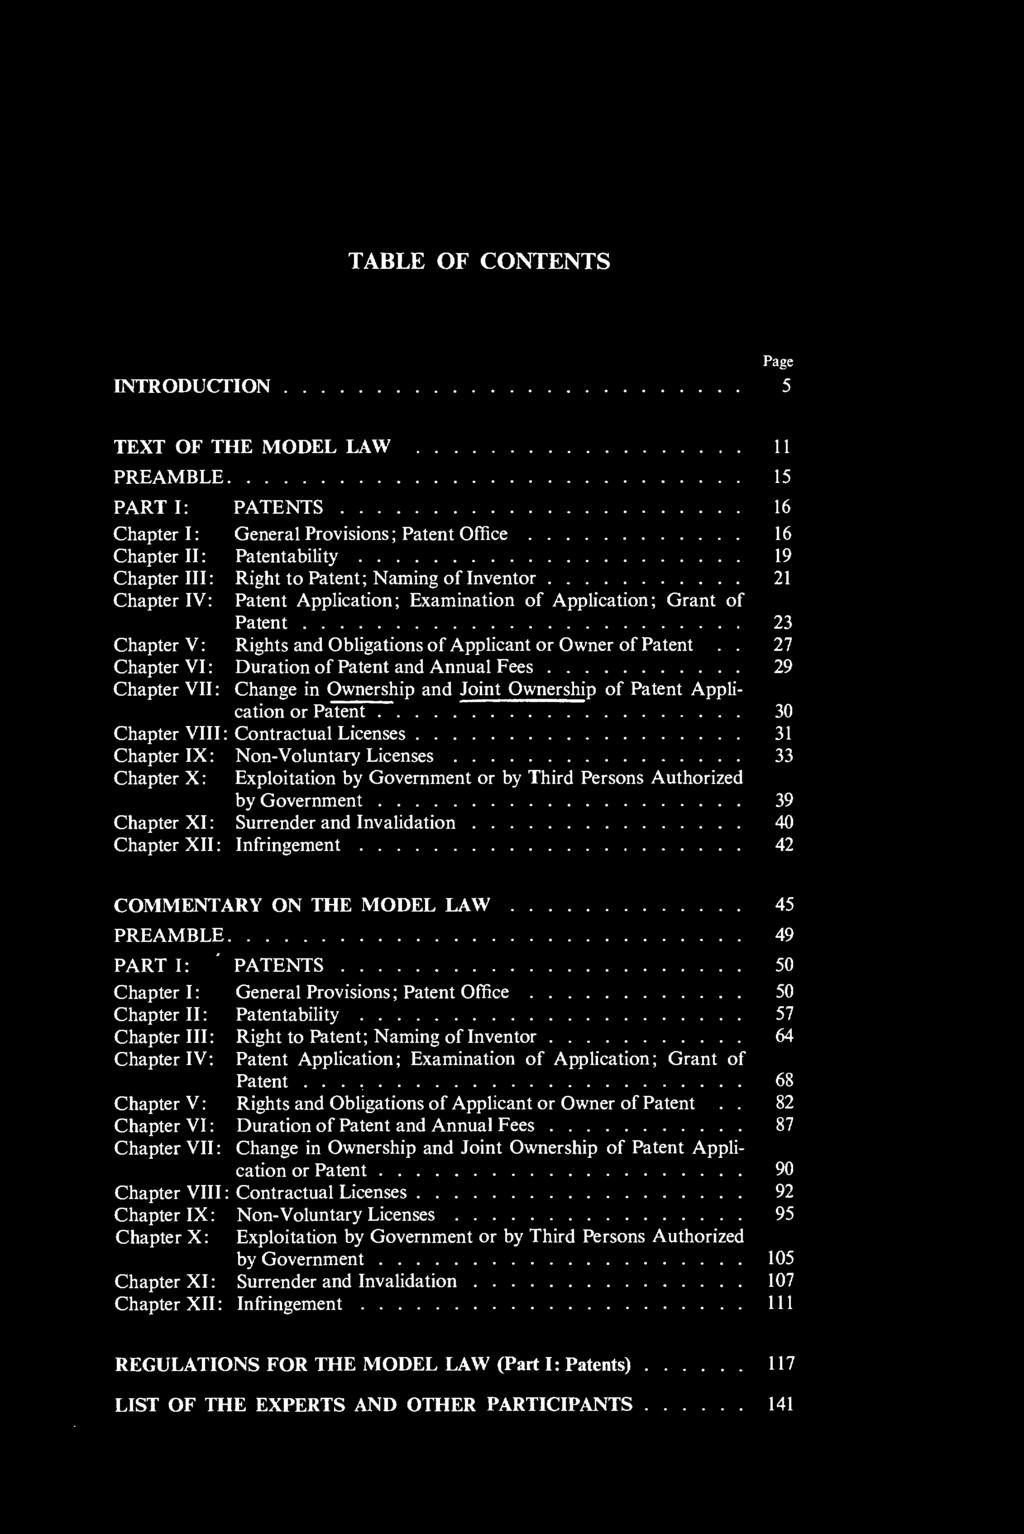 TABLE OF CONTENTS Page INTRODUCTION 5 TEXT OF THE MODEL LAW 11 PREAMBLE 15 PART I: PATENTS 16 Chapter I: General Provisions ; Patent Office 16 Chapter II : Patentability 19 Chapter III: Right to